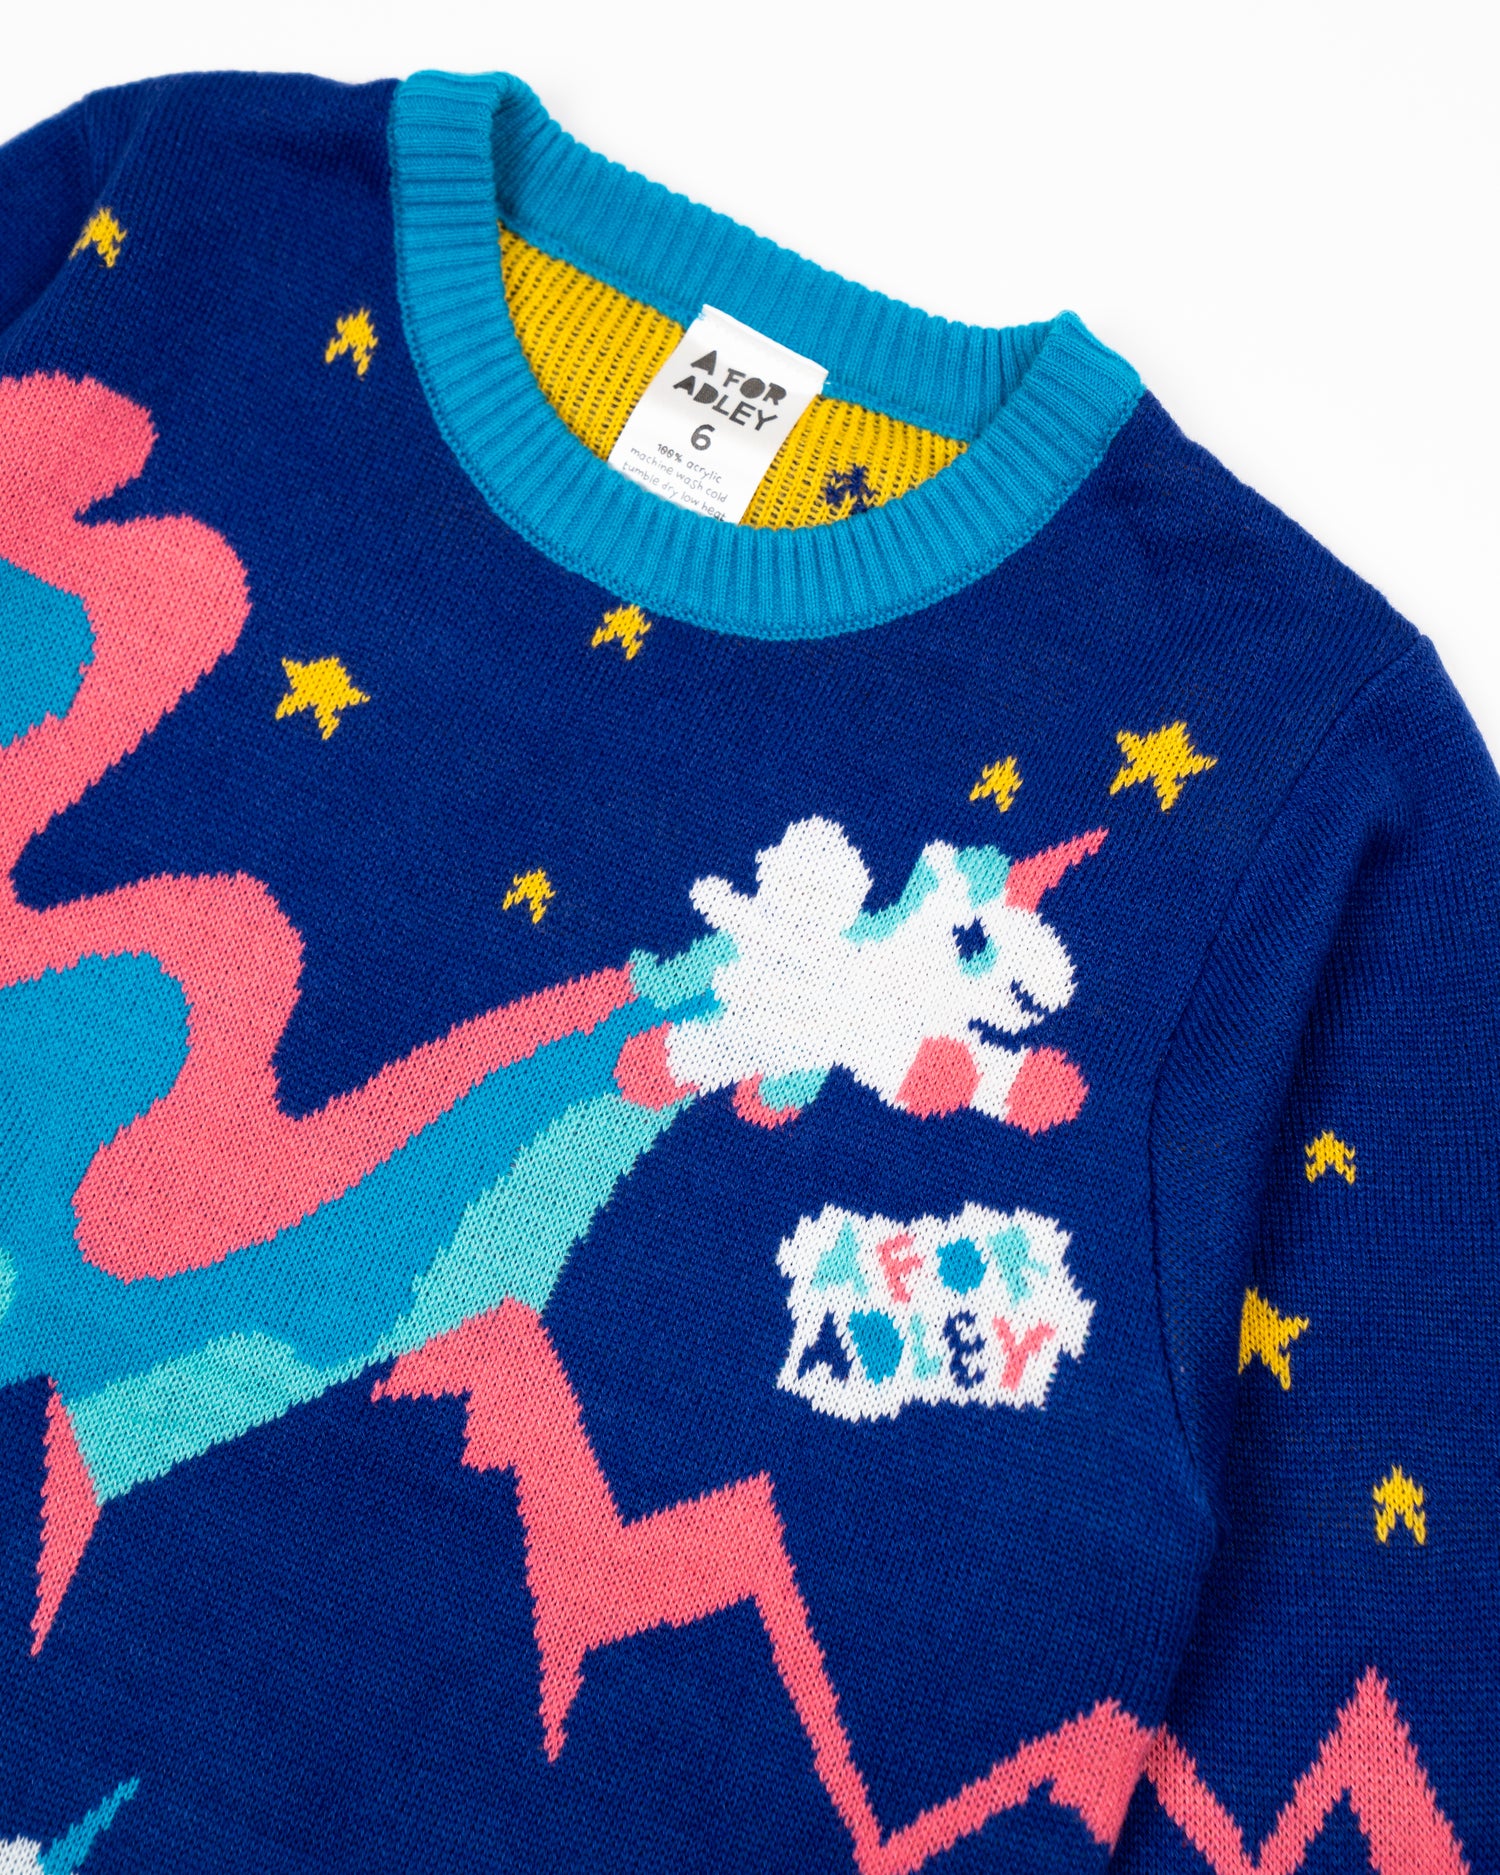 A for Adley Winter Rainbow Sweater